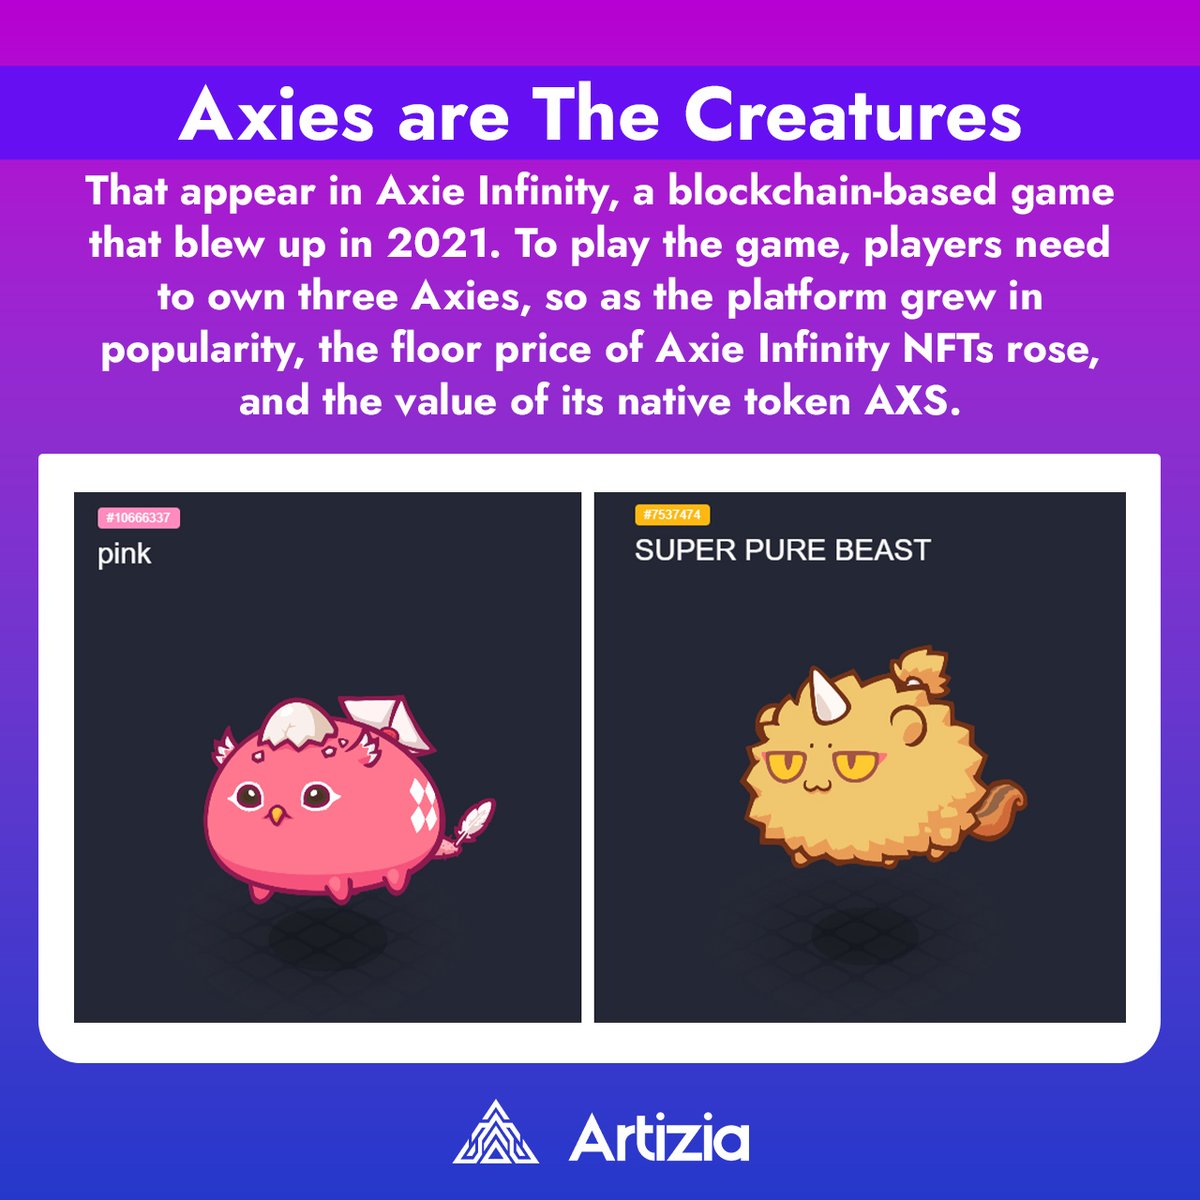 Join the Axie craze! 🚀🌟These cute blockchain critters from Axie Infinity have taken the gaming world by storm, lifting the NFT floor price and AXS value. Ready to play? 🎮💥 
.
.
.
#AxieInfinity #NFTgaming #CryptoPets #PlayEarn #BlockchainGaming #CryptoGames #NFT#VirtualEconomy